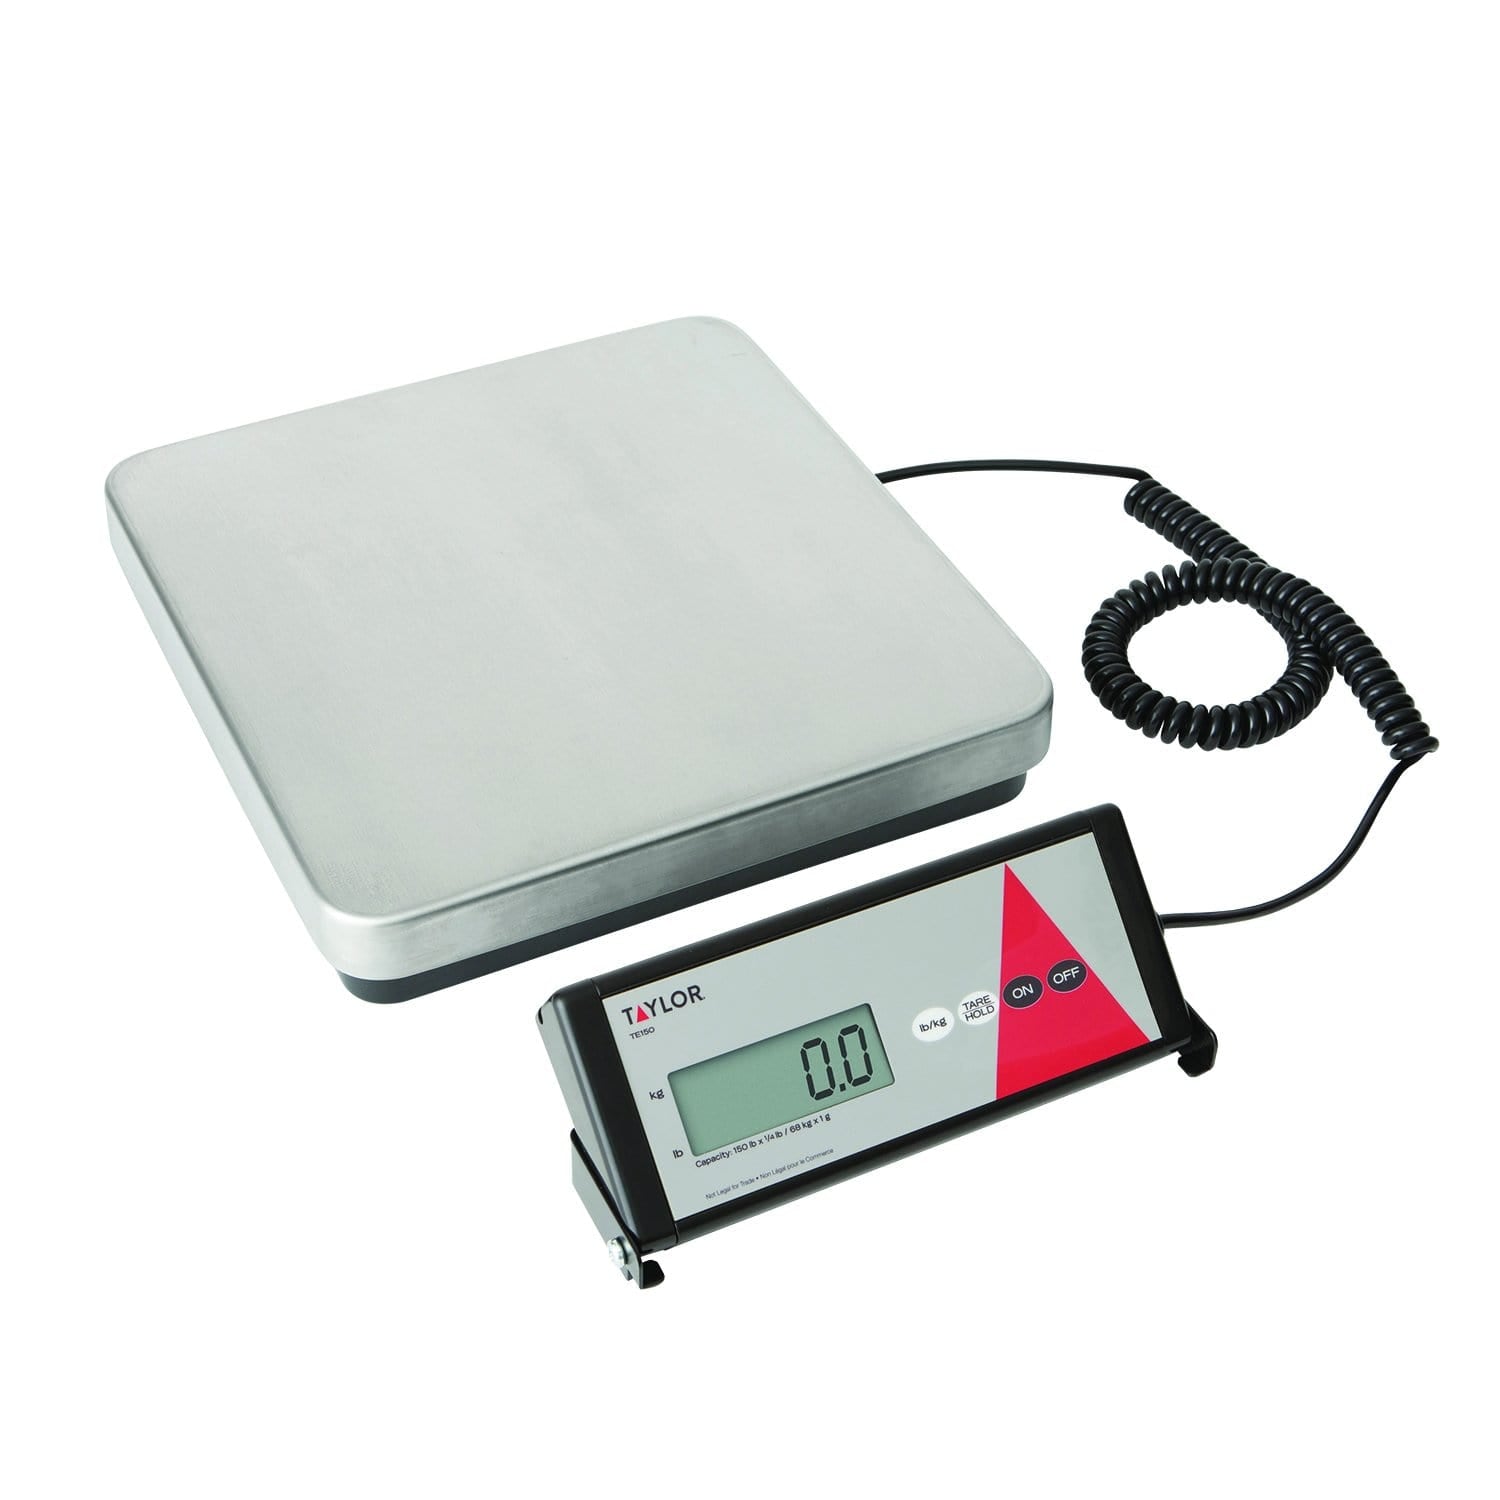  Extra-Large Dial Analog Precision Bathroom Scale, 150